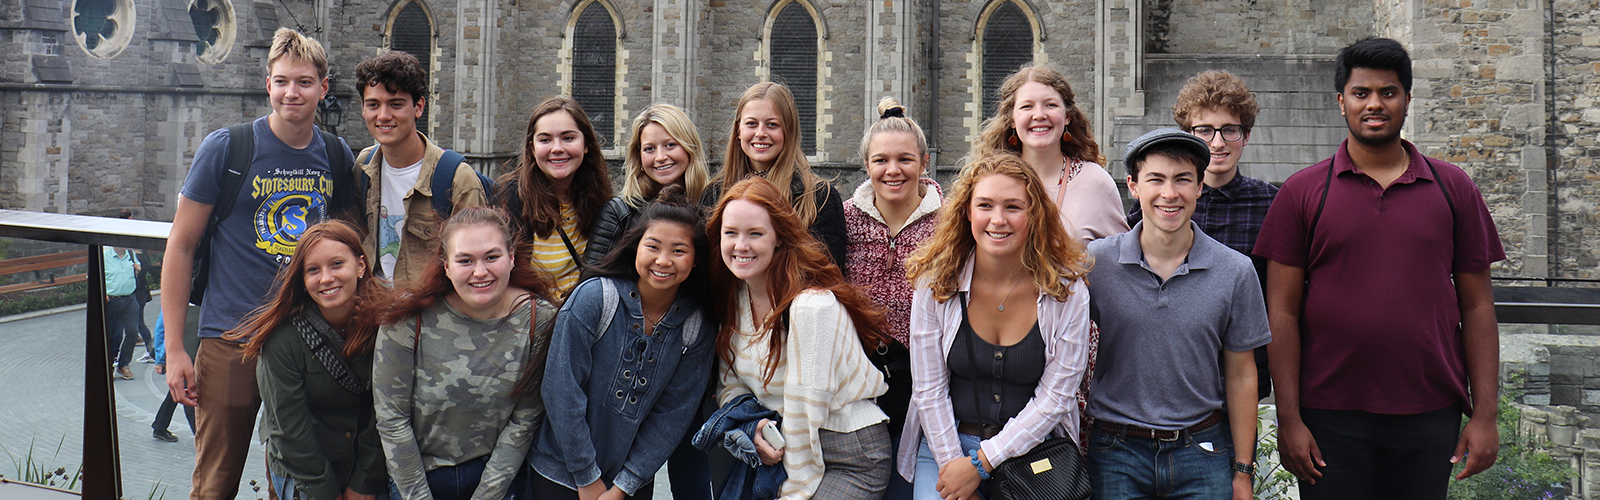 Summer Launch students pose infront of medieval building